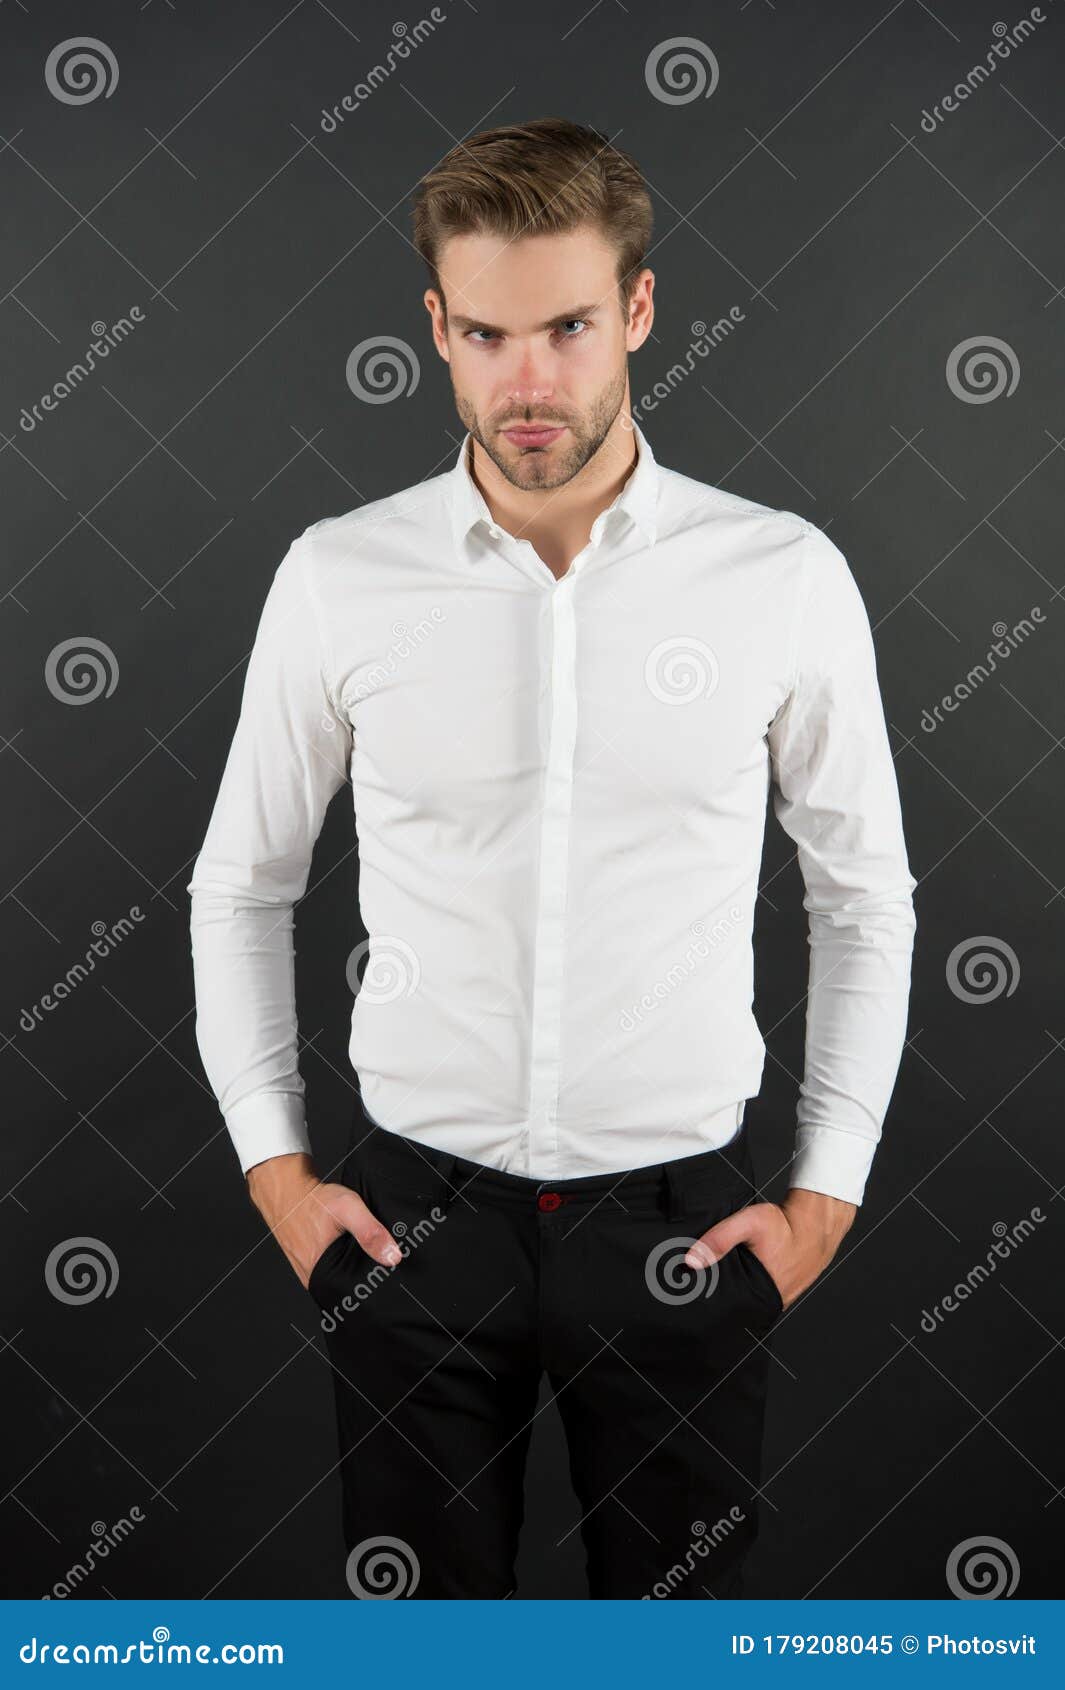 Black Pants White Shirt Stock Photos and Images  123RF